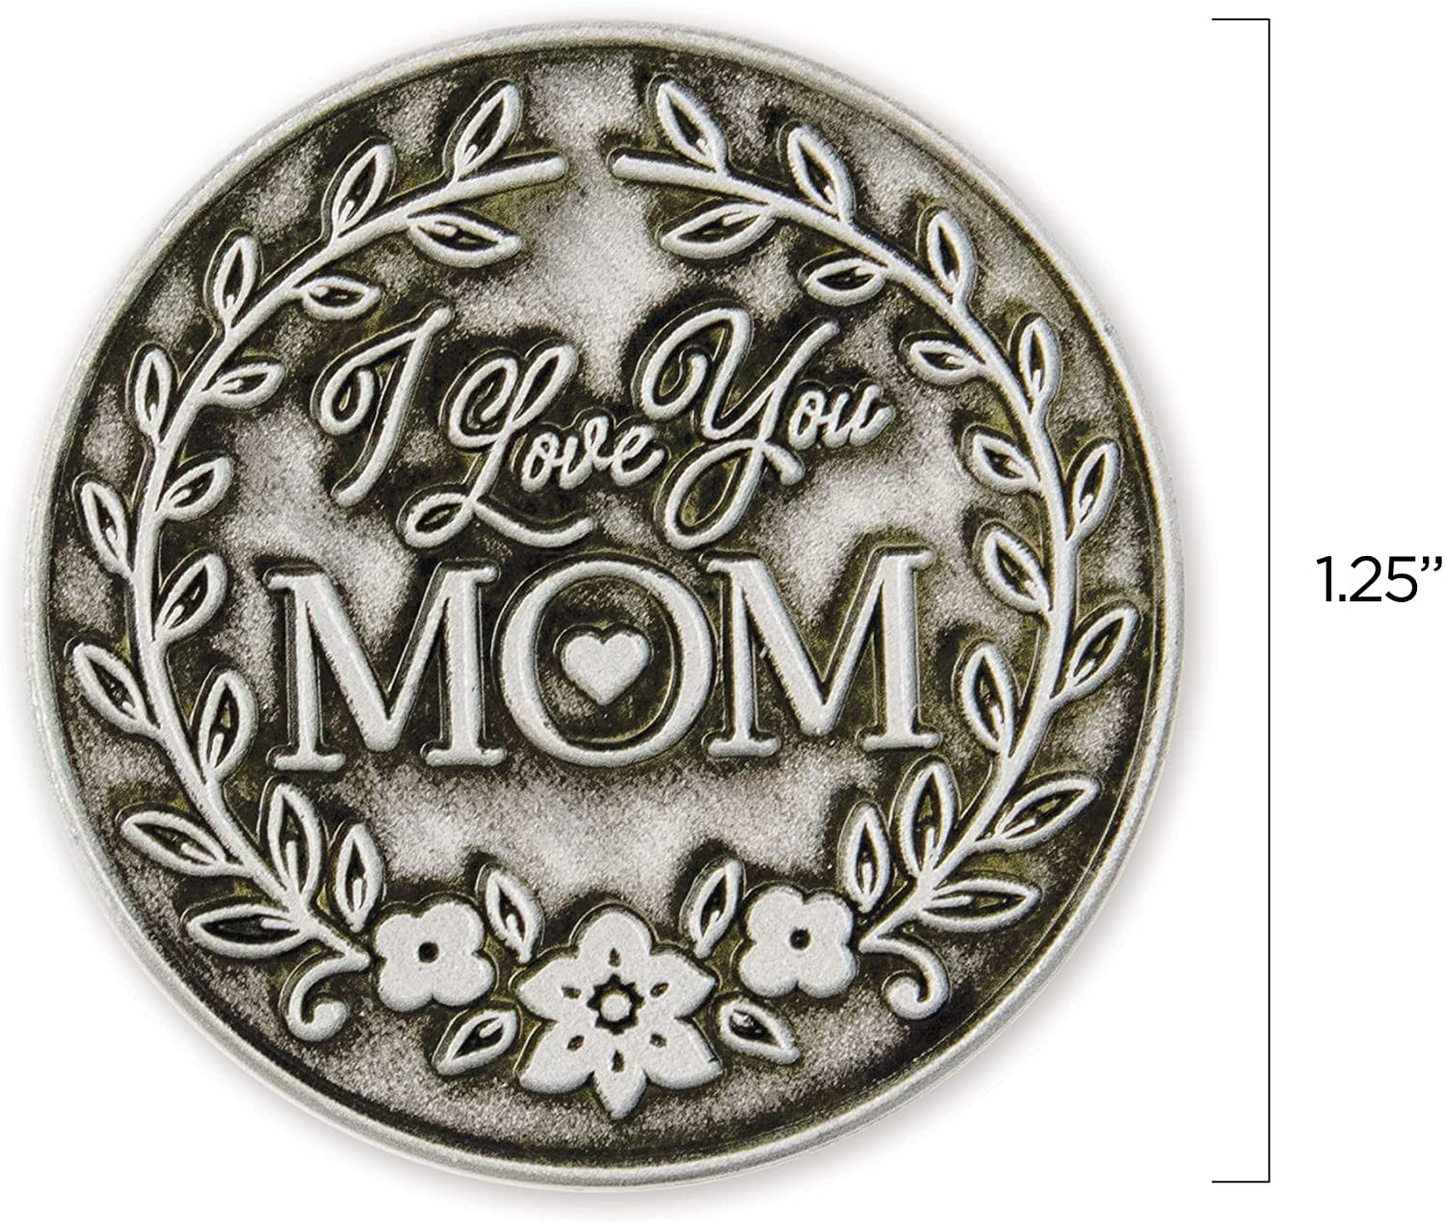 I Love You Mom Love Expression Coin, Pocket Keepsake Gifts of Appreciation for Mothers Day, Birthday & Special Occasion Distance Gifts, Tokens of Appreciation for Family